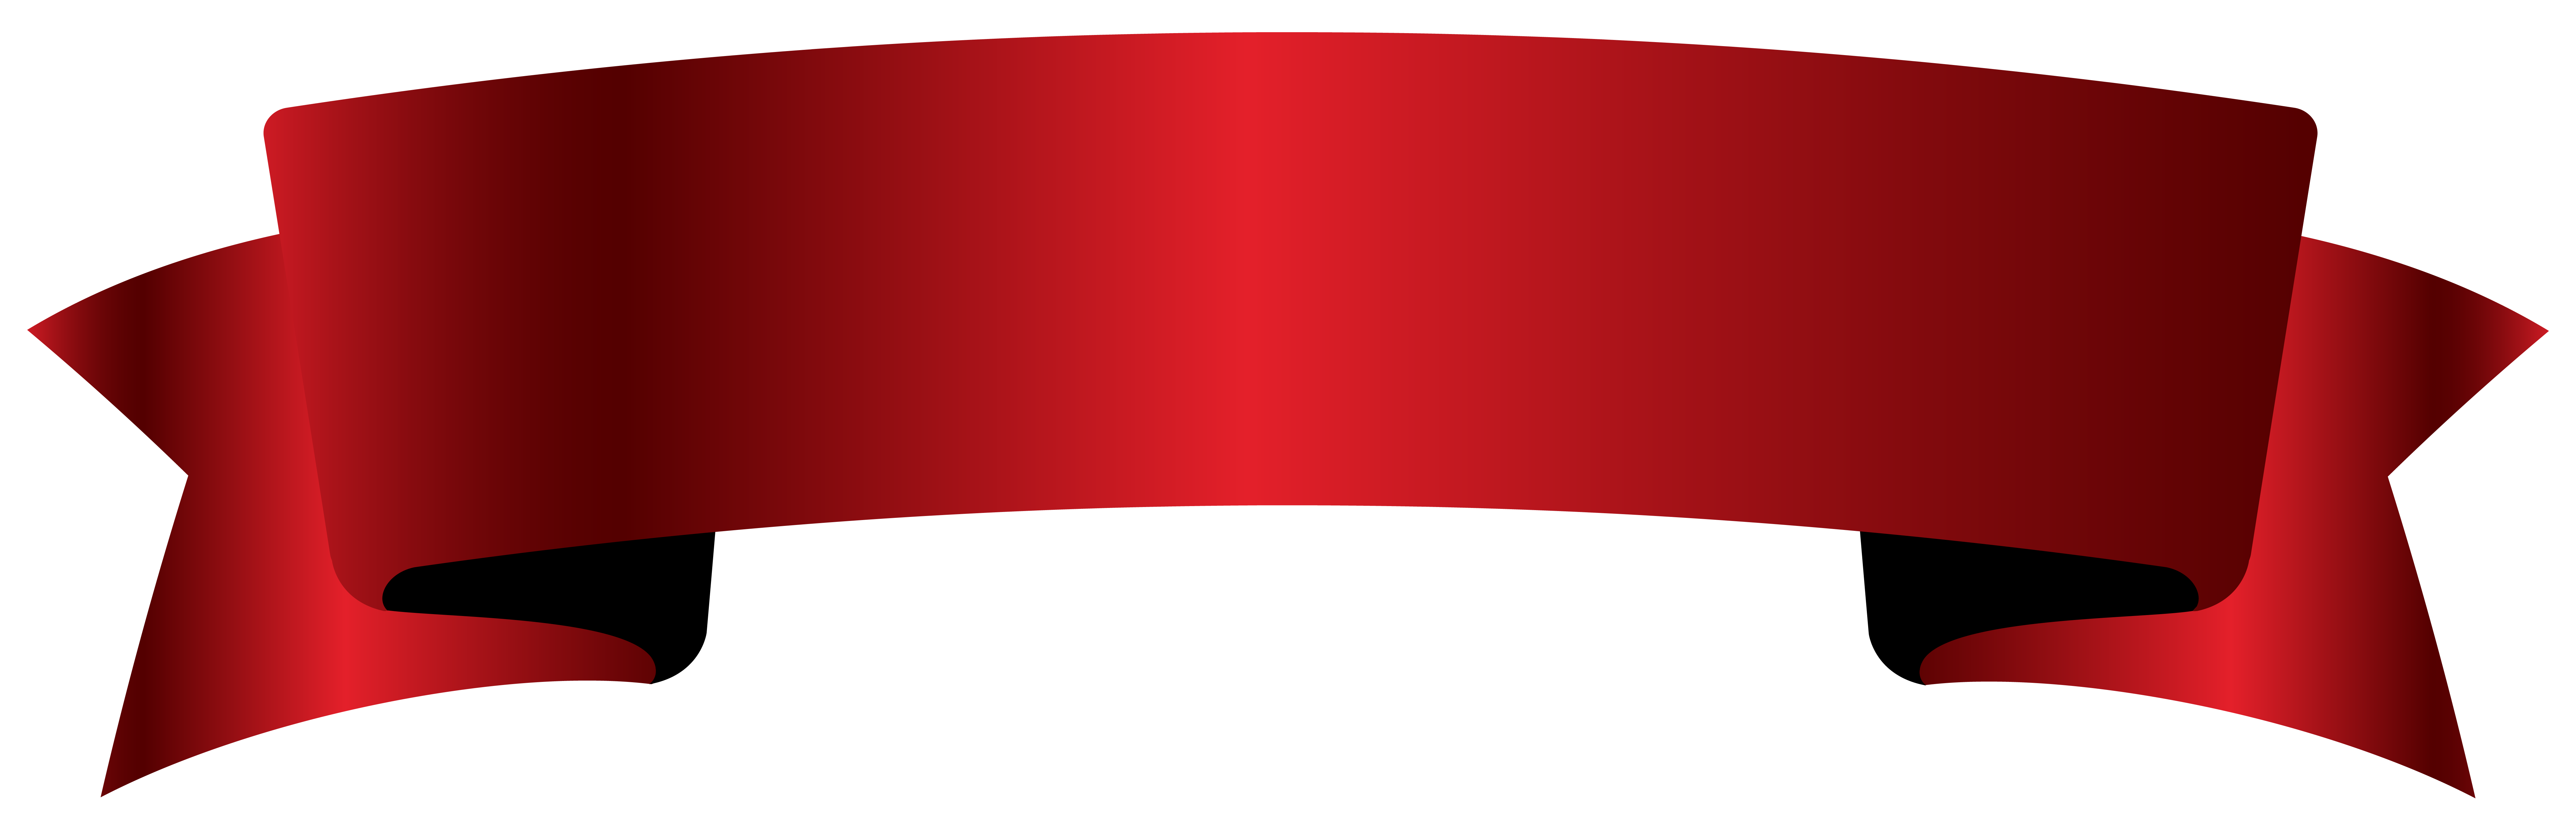 Geology clipart property. Red banner png picture